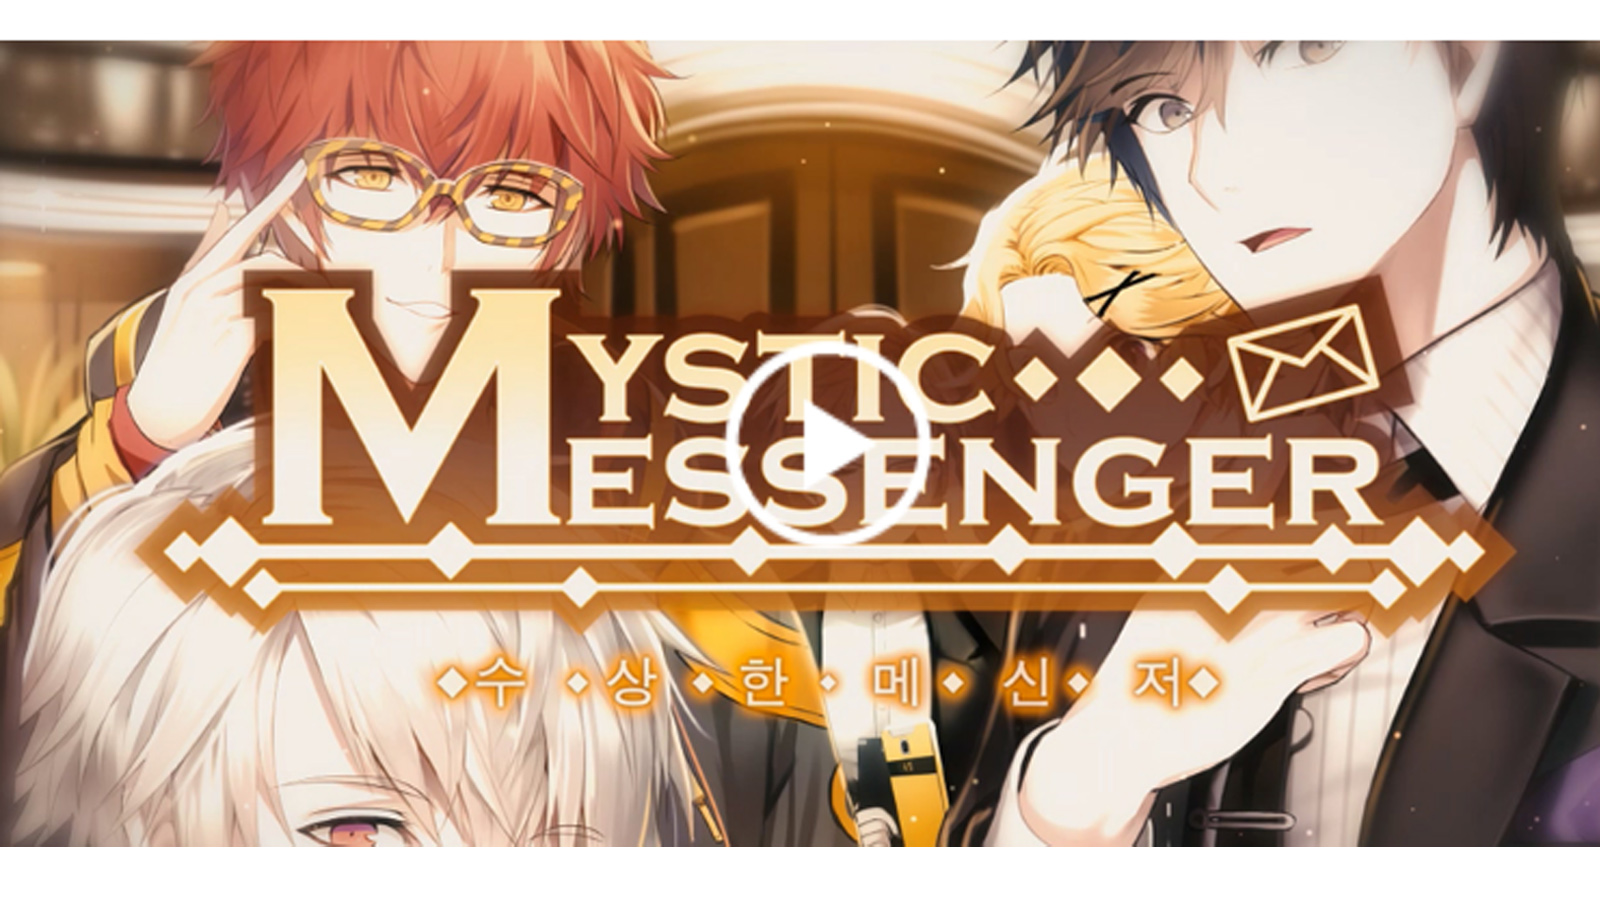 Find pricing, reviews and other details about Mystic Messenger